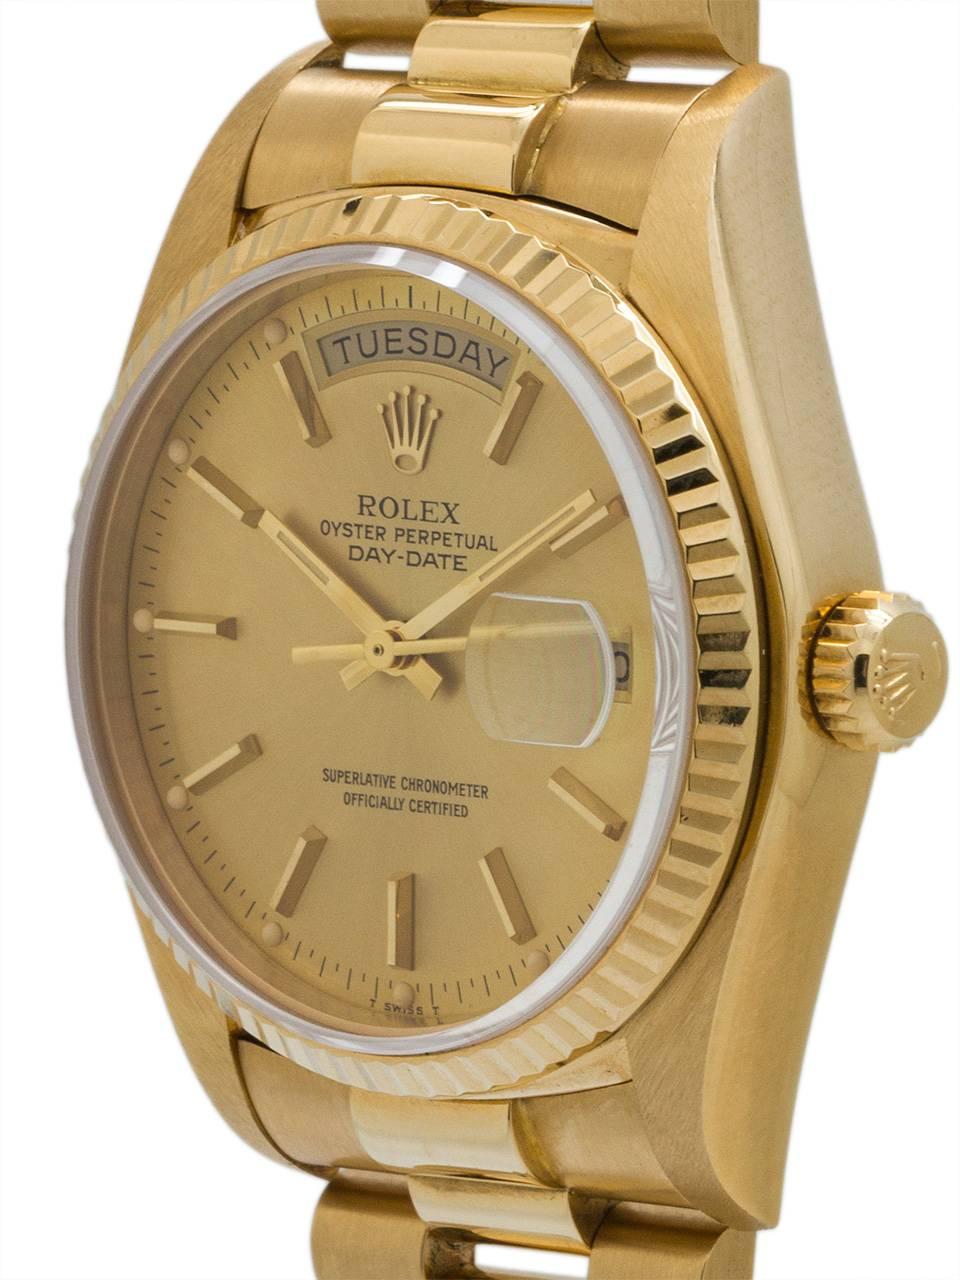 Rolex ref 18038 18K YG Day Date President case serial# 7.2 million circa 1982. Featuring 36mm diameter full size man’s model with sapphire crystal and fluted bezel, with a beautiful original champagne Rolex dial with gold applied indexes and gilt